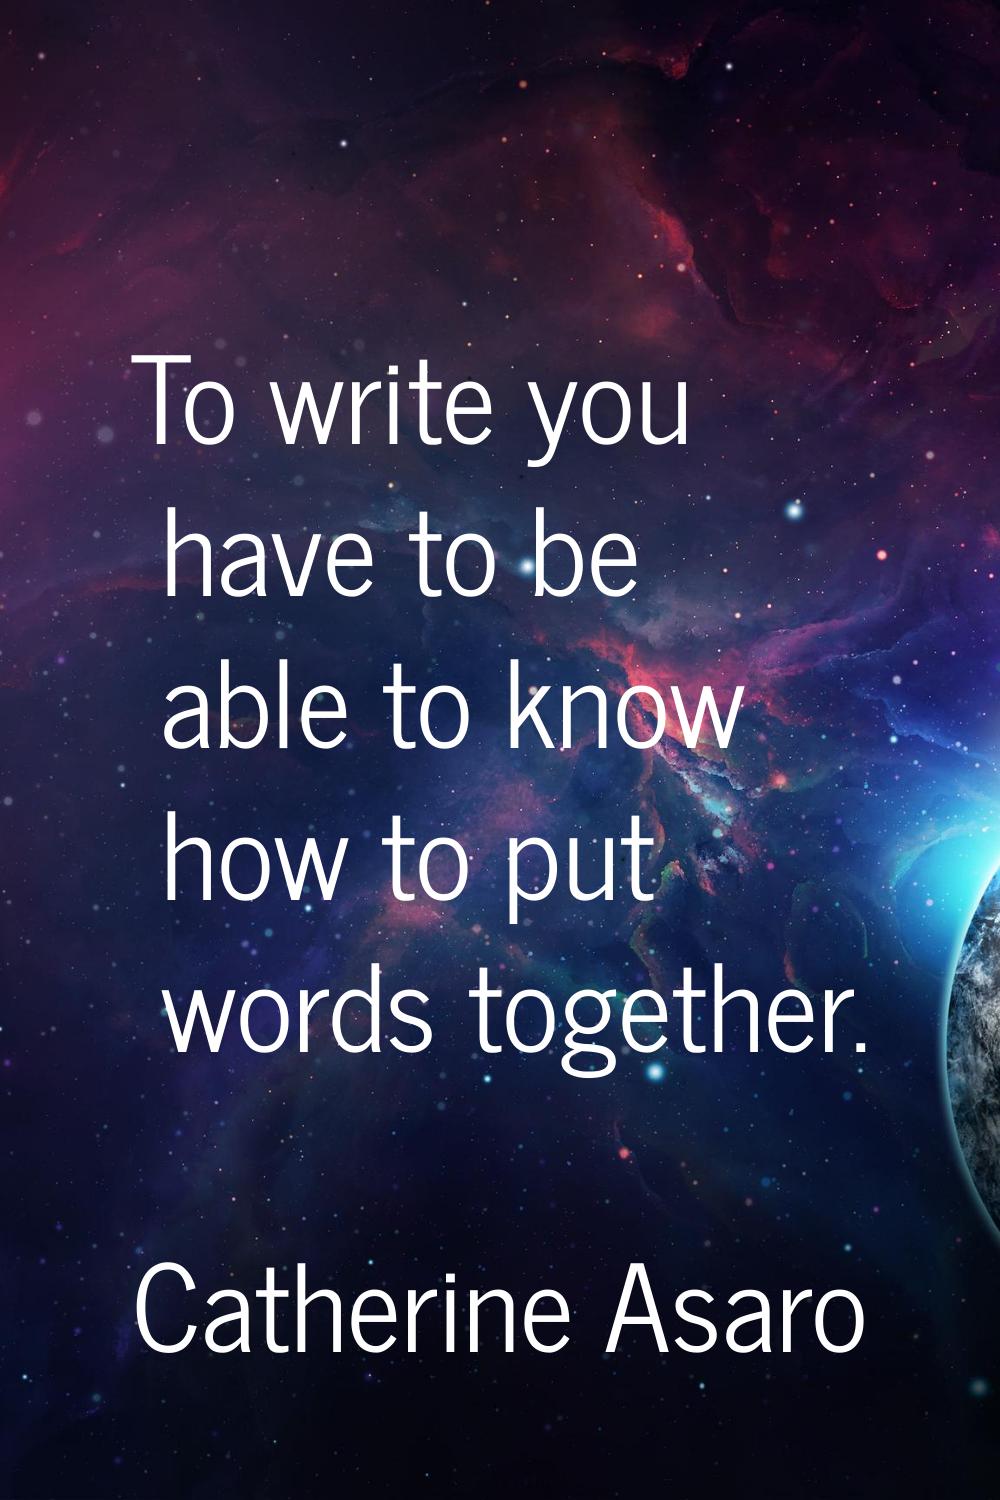 To write you have to be able to know how to put words together.